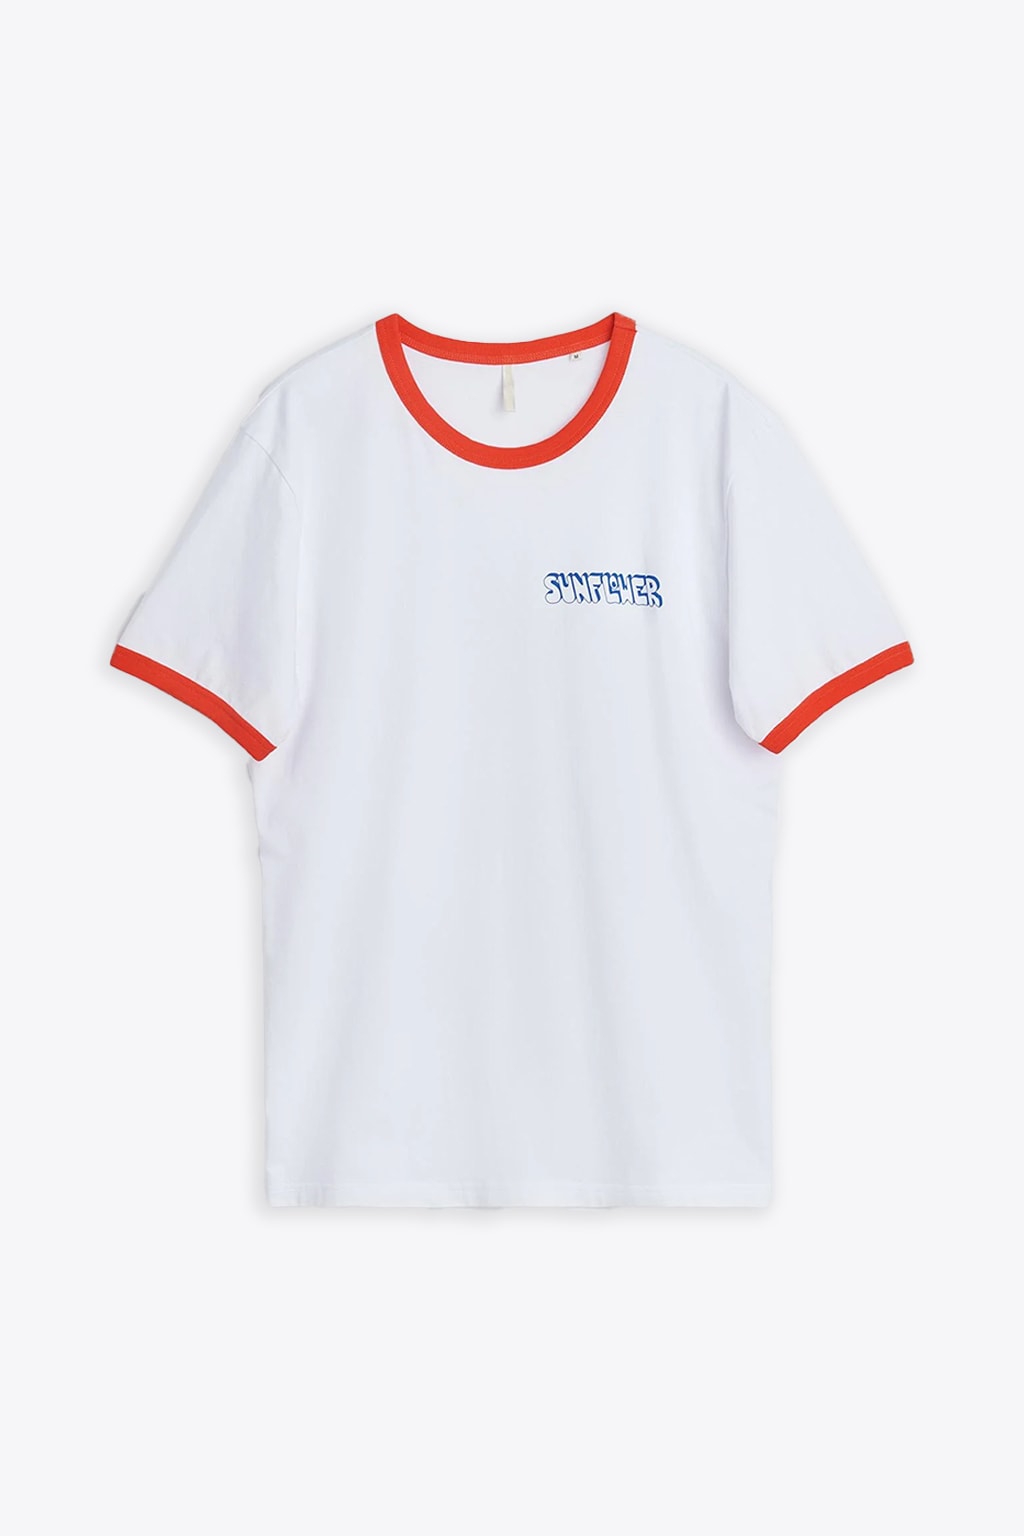 Jagger Tee White T-shirt With Red Hems - Jagger Tee